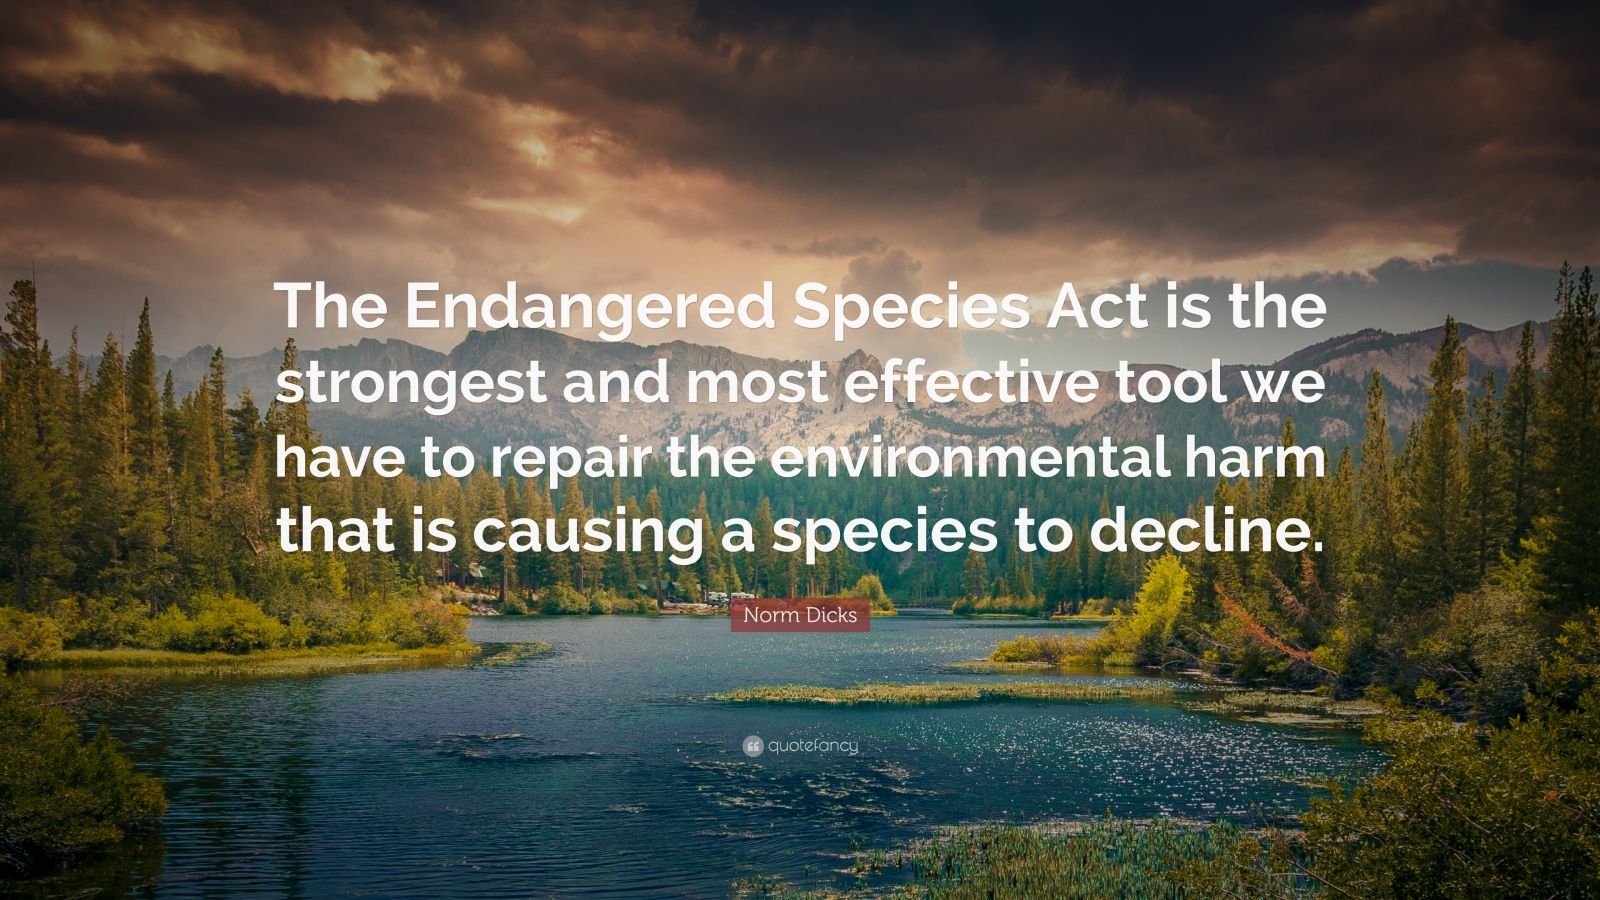 Norm Dicks Quote: “The Endangered Species Act is the strongest and most ...